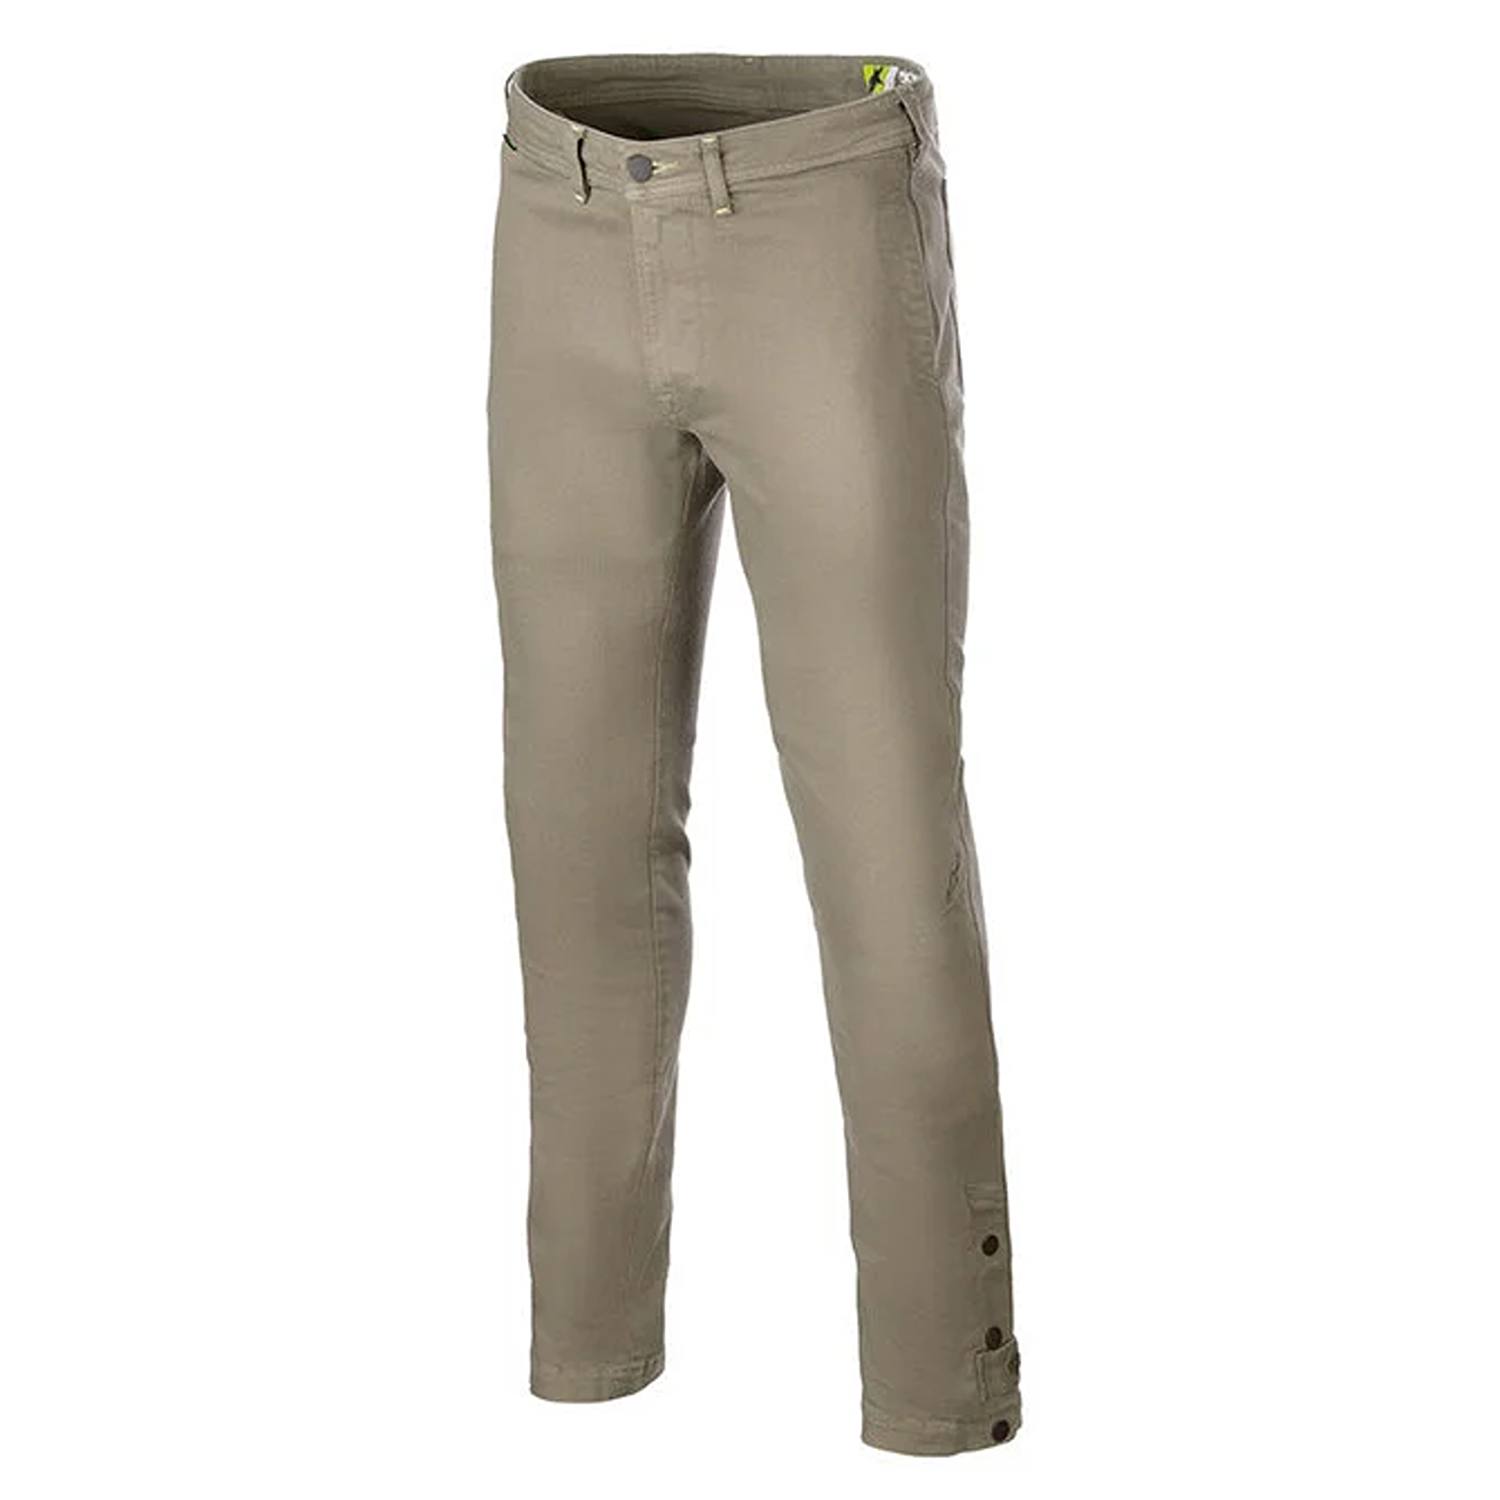 Image of Alpinestars Stratos Regular Fit Tech Riding Pants Military Green Taille 34